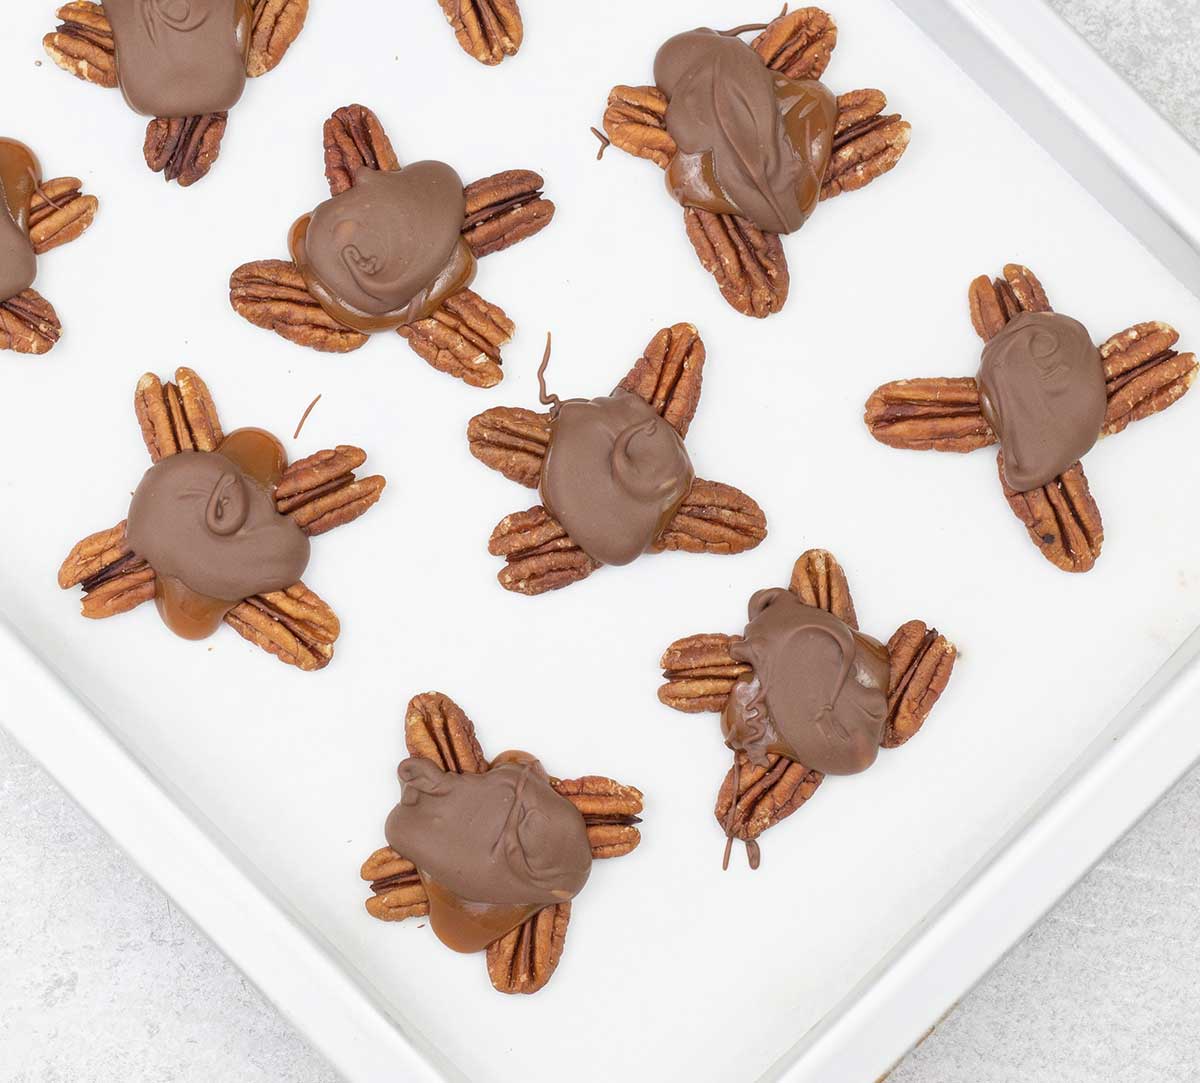 Turtle chocolate candy on a baking sheet.